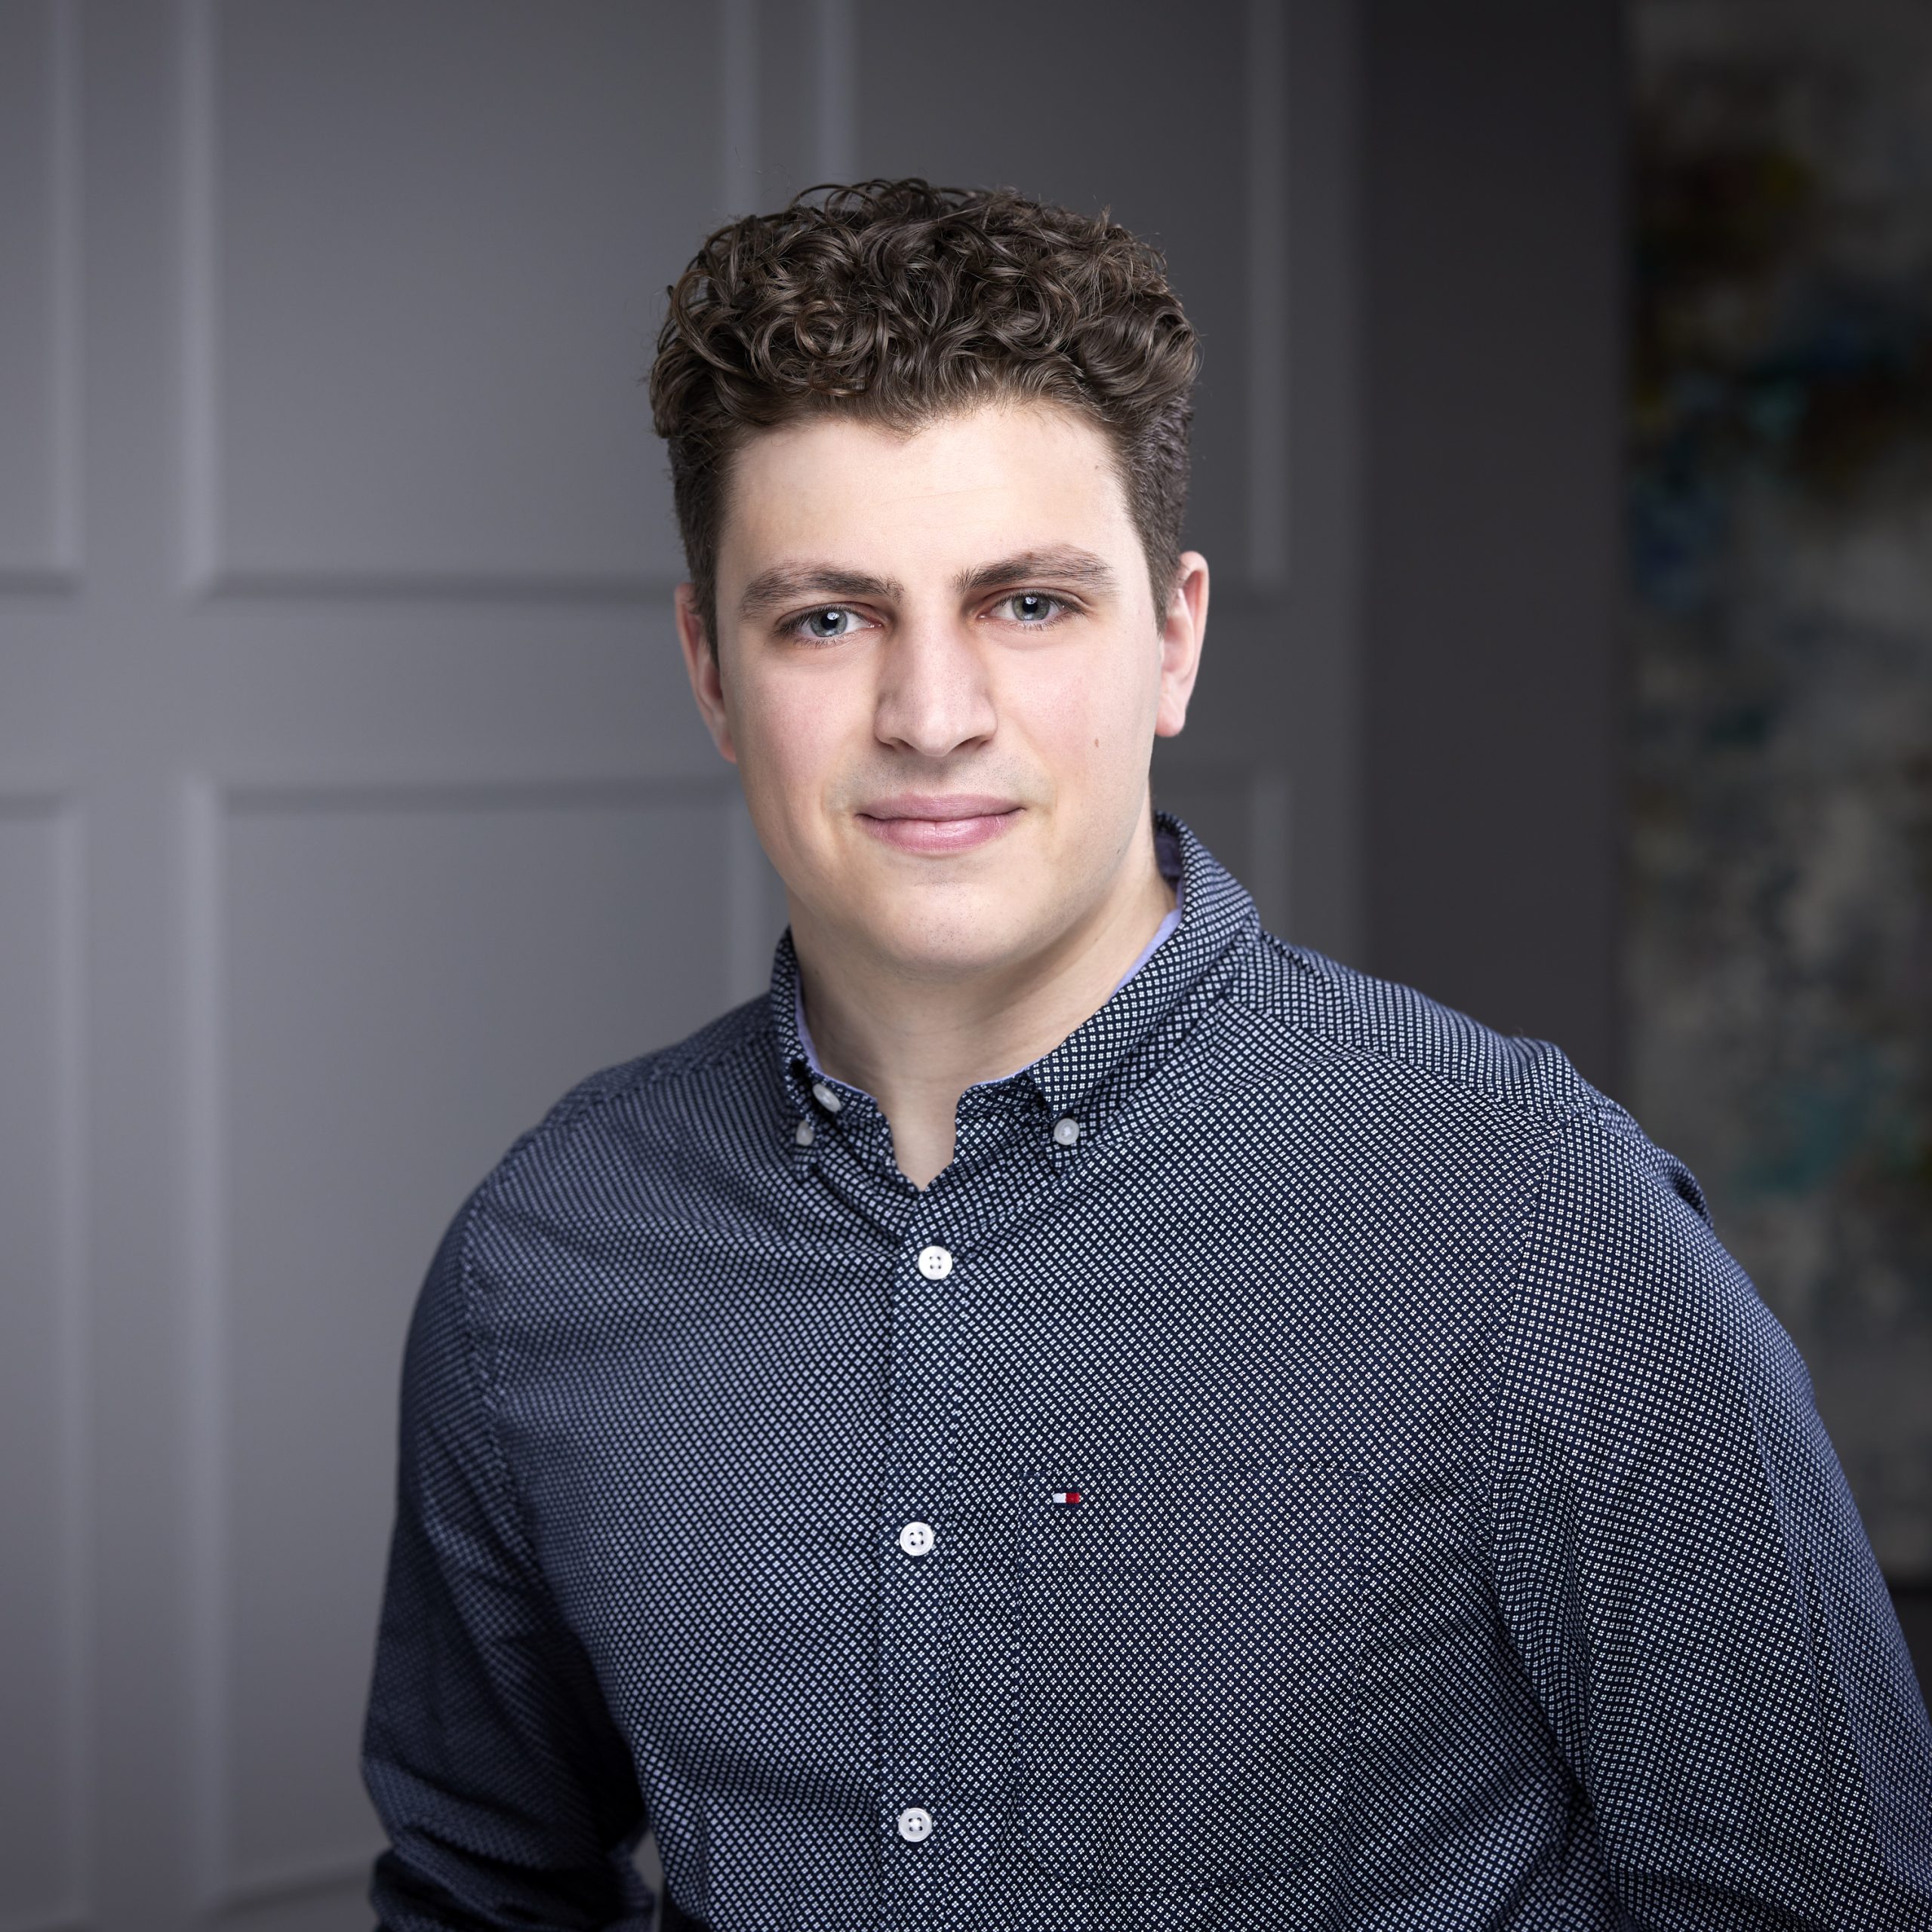 An image of Dylan Paolone in the St. Catharines office of DDL & Co.